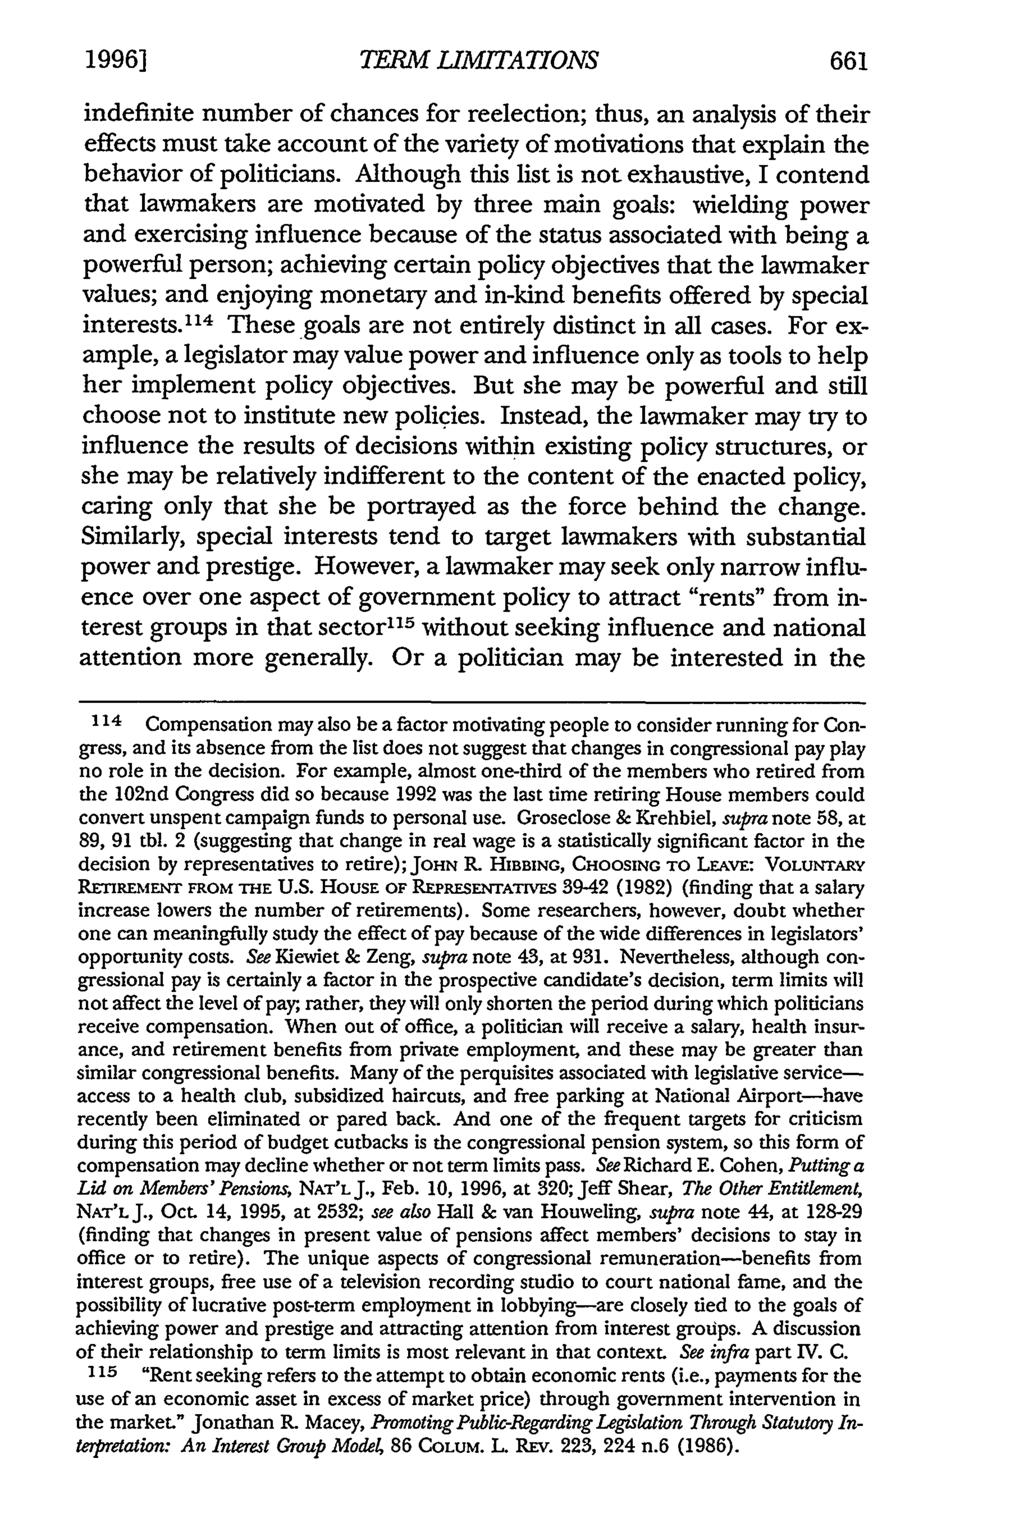 1996] TERM LIMITATIONS indefinite number of chances for reelection; thus, an analysis of their effects must take account of the variety of motivations that explain the behavior of politicians.